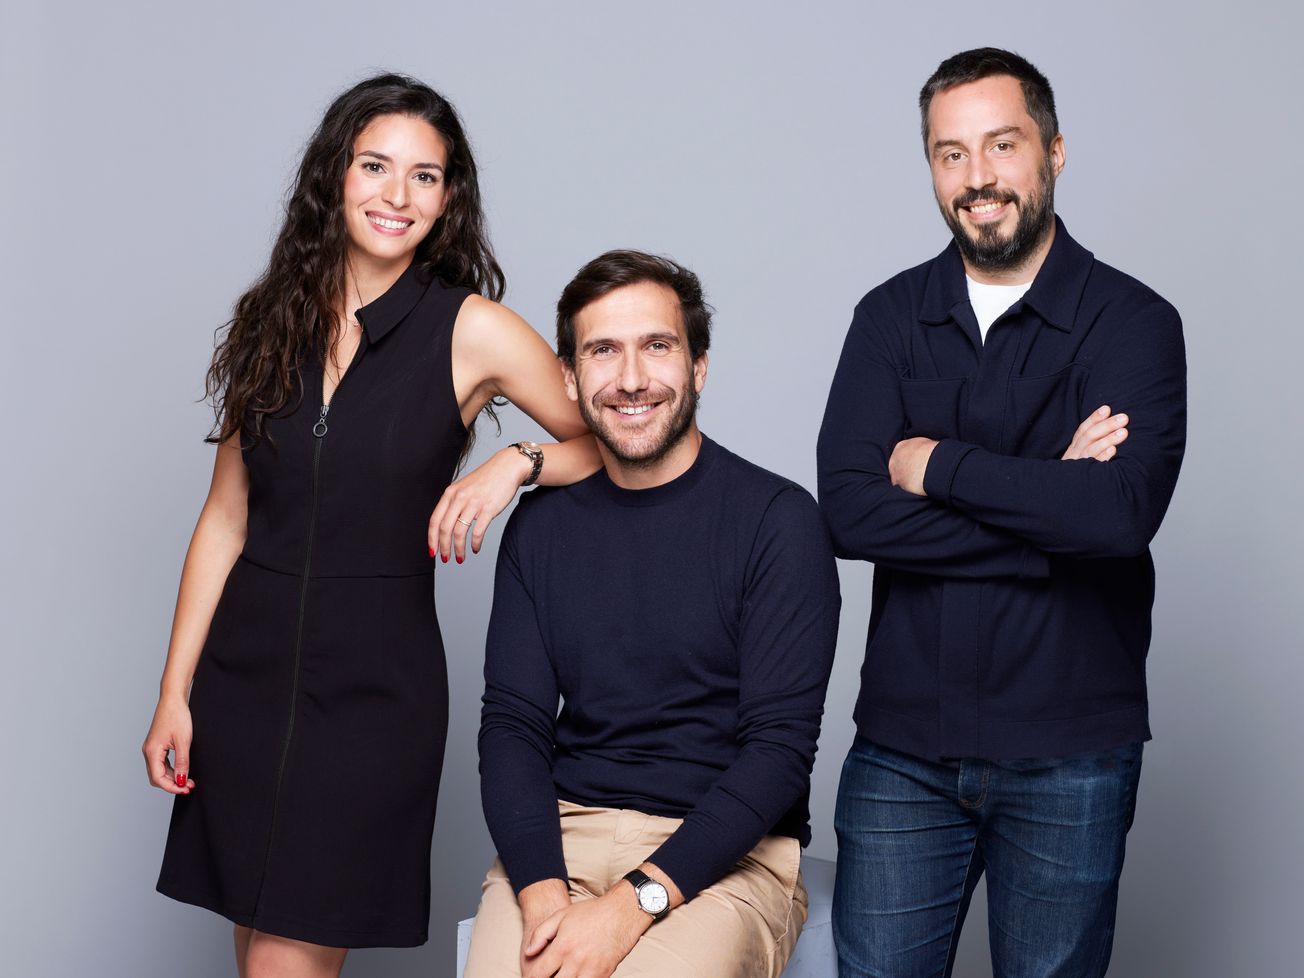 Pivot co-founders (l to right): Estelle Giuly, Marc-Antoine Lacroix, and Romain Libeau.